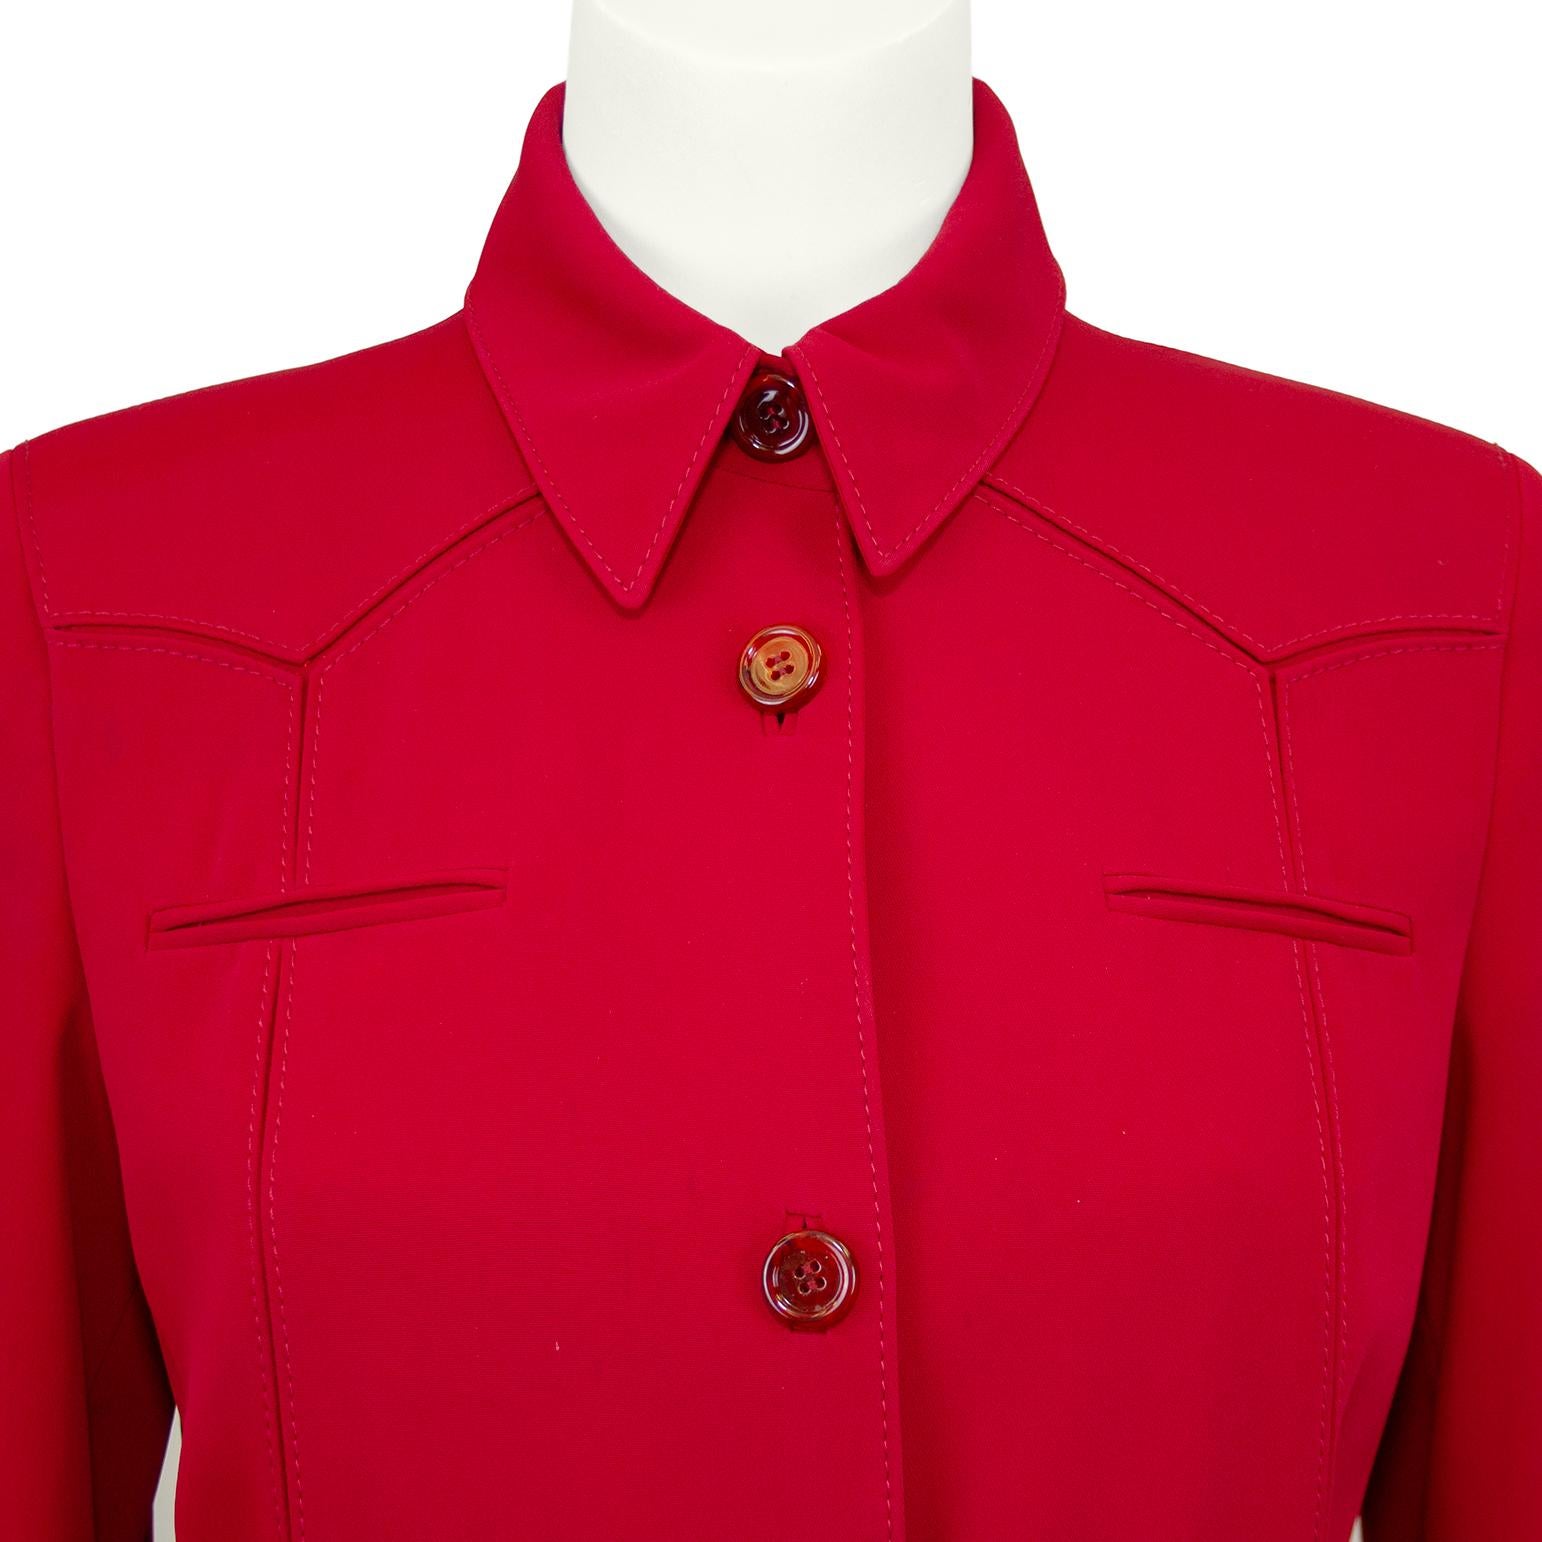 Women's Late 1990s Prada Red Suit with Belt